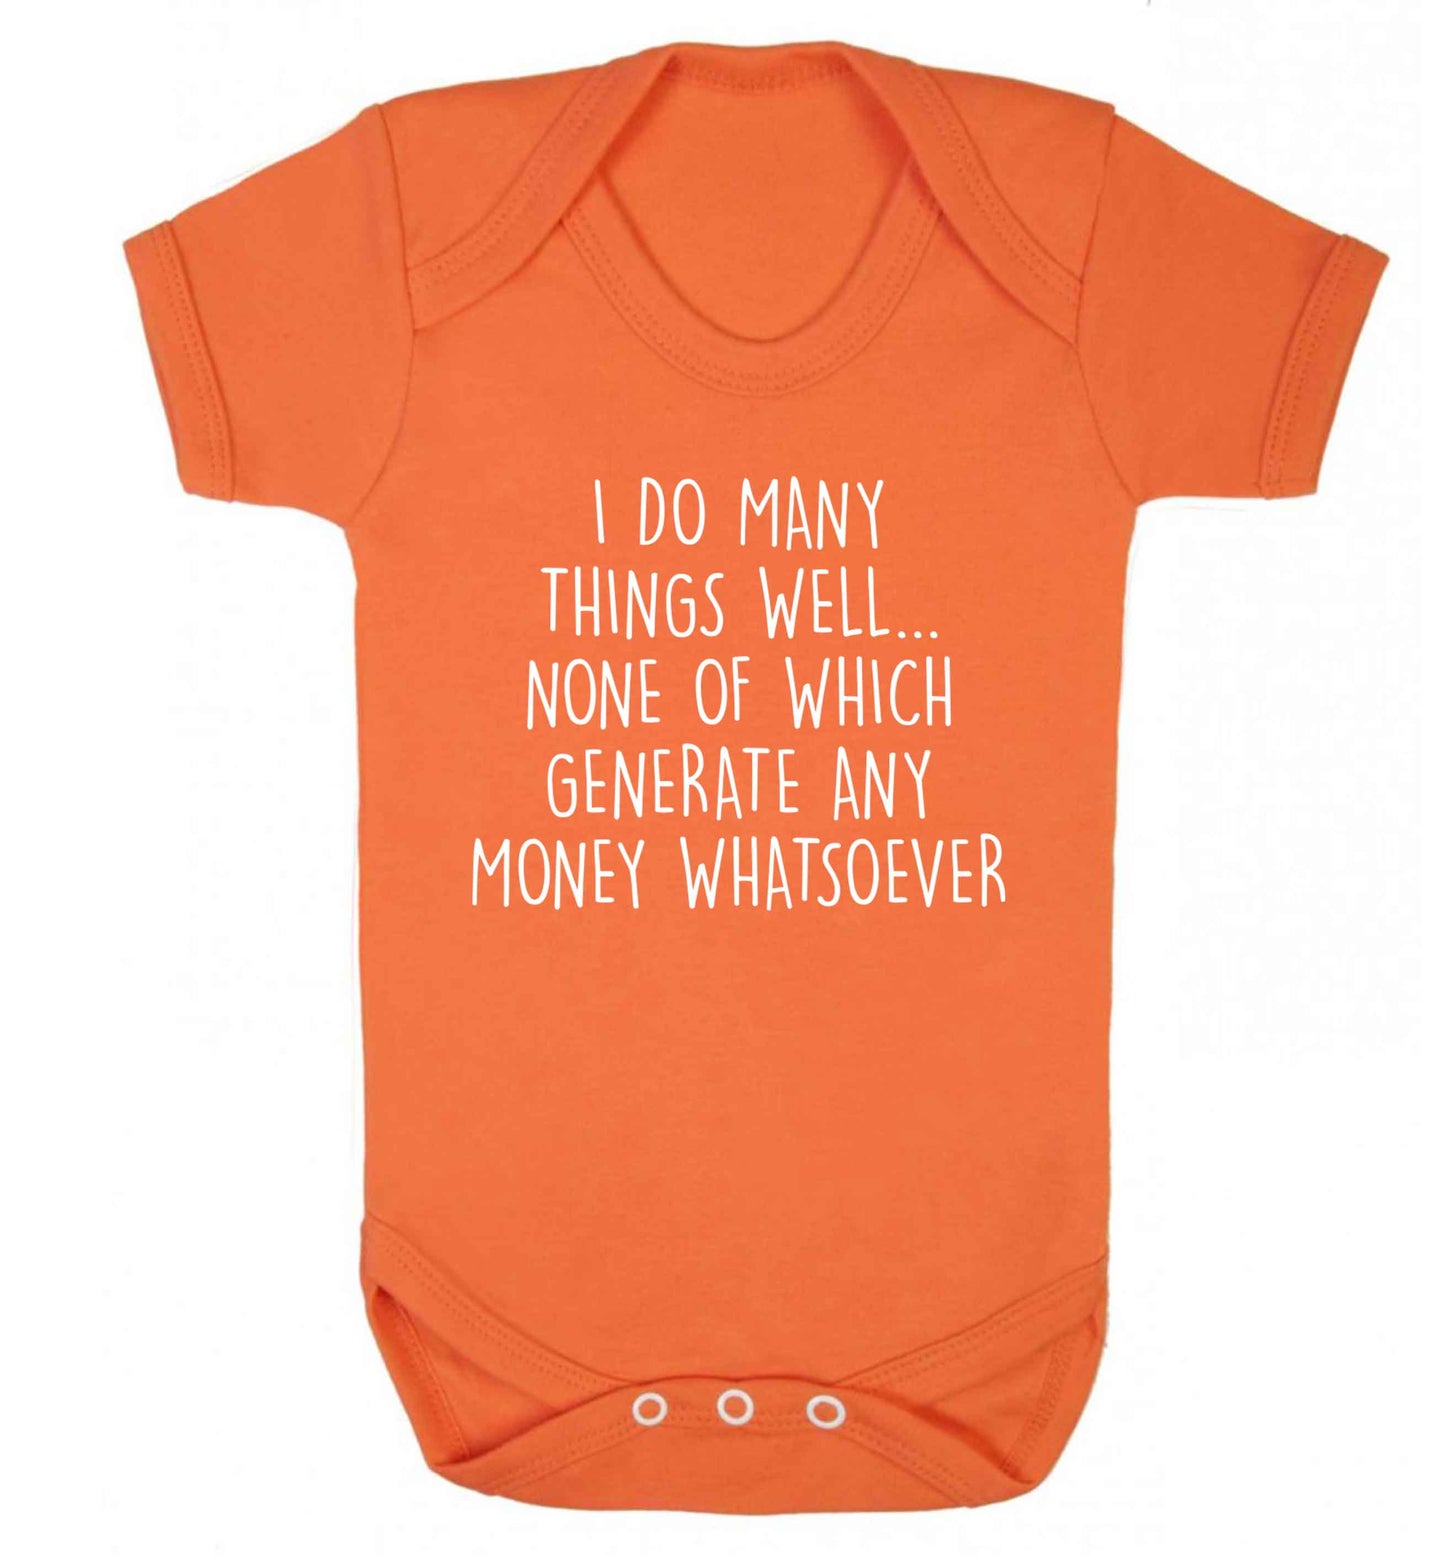 I do many things well none of which generate income Baby Vest orange 18-24 months